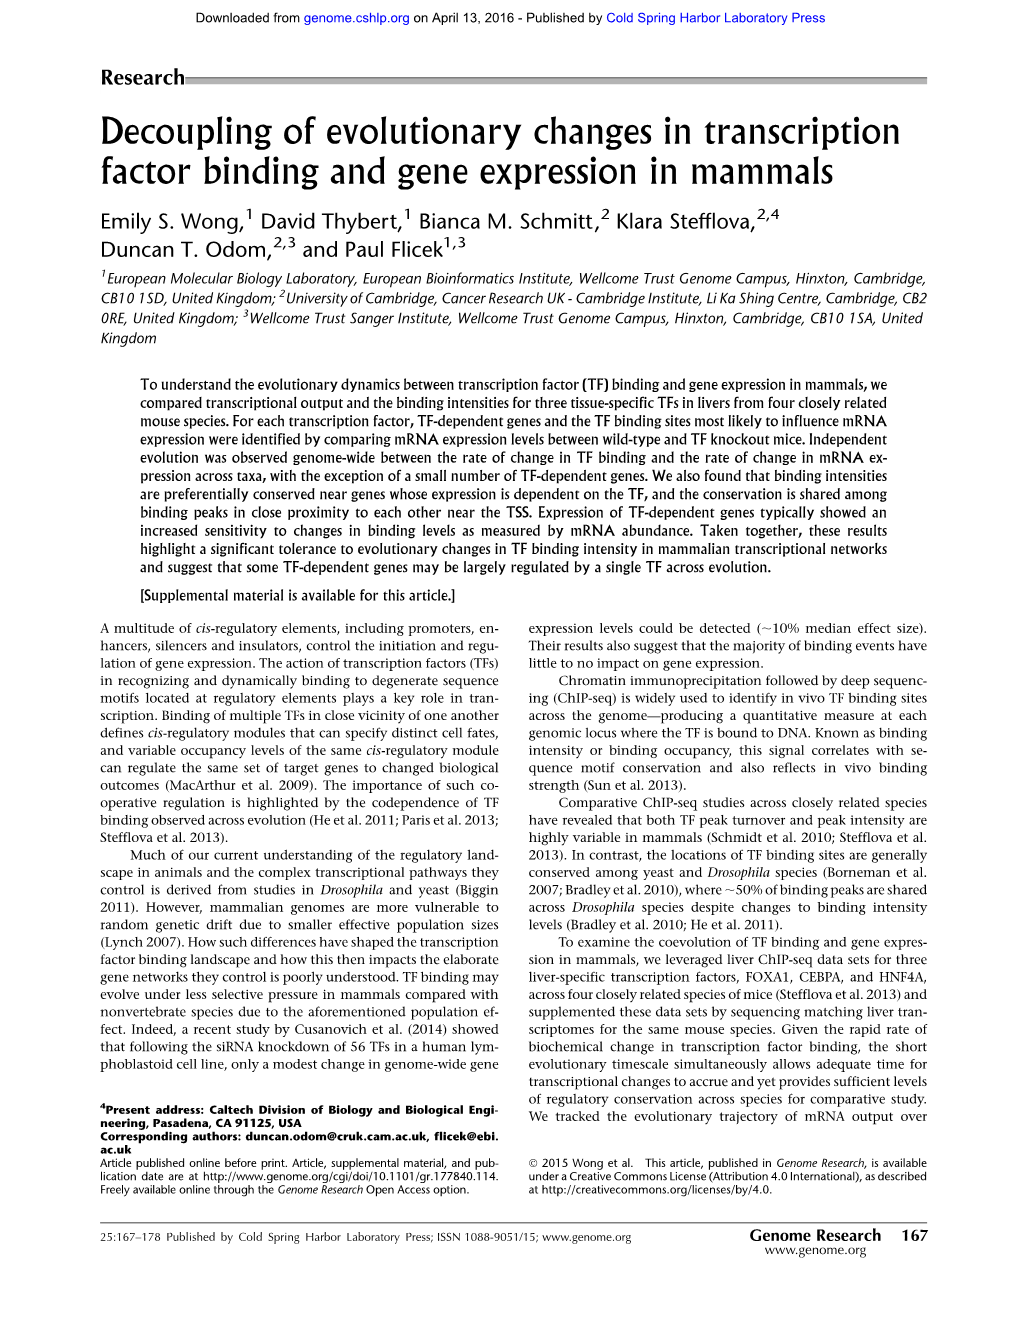 Decoupling of Evolutionary Changes in Transcription Factor Binding and Gene Expression in Mammals